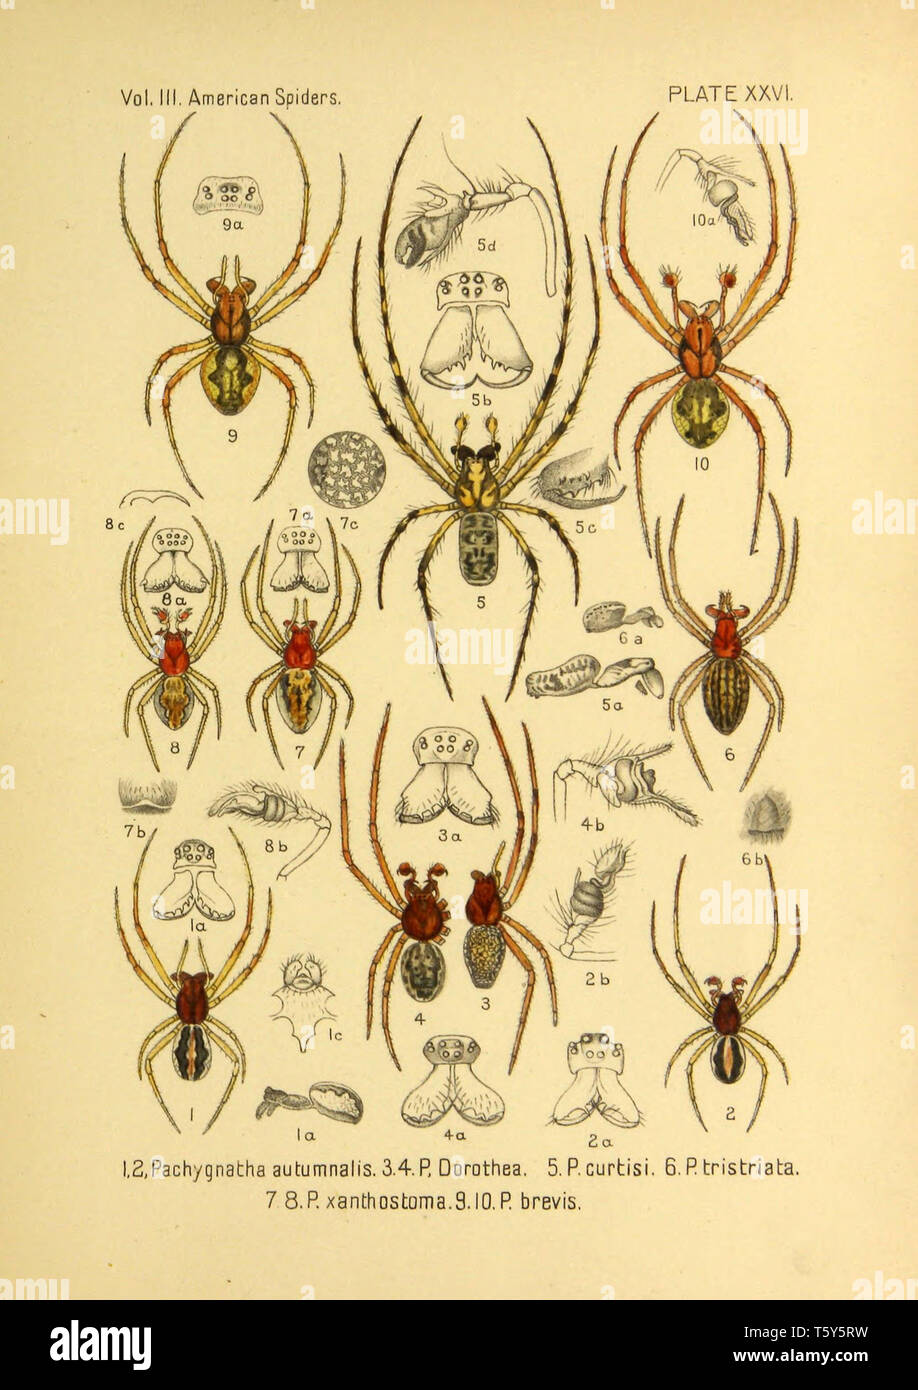 Beautiful vintage hand drawn illustrations of exotic spiders from old book. It can be used as poster or decorative element for interior design. Stock Photo